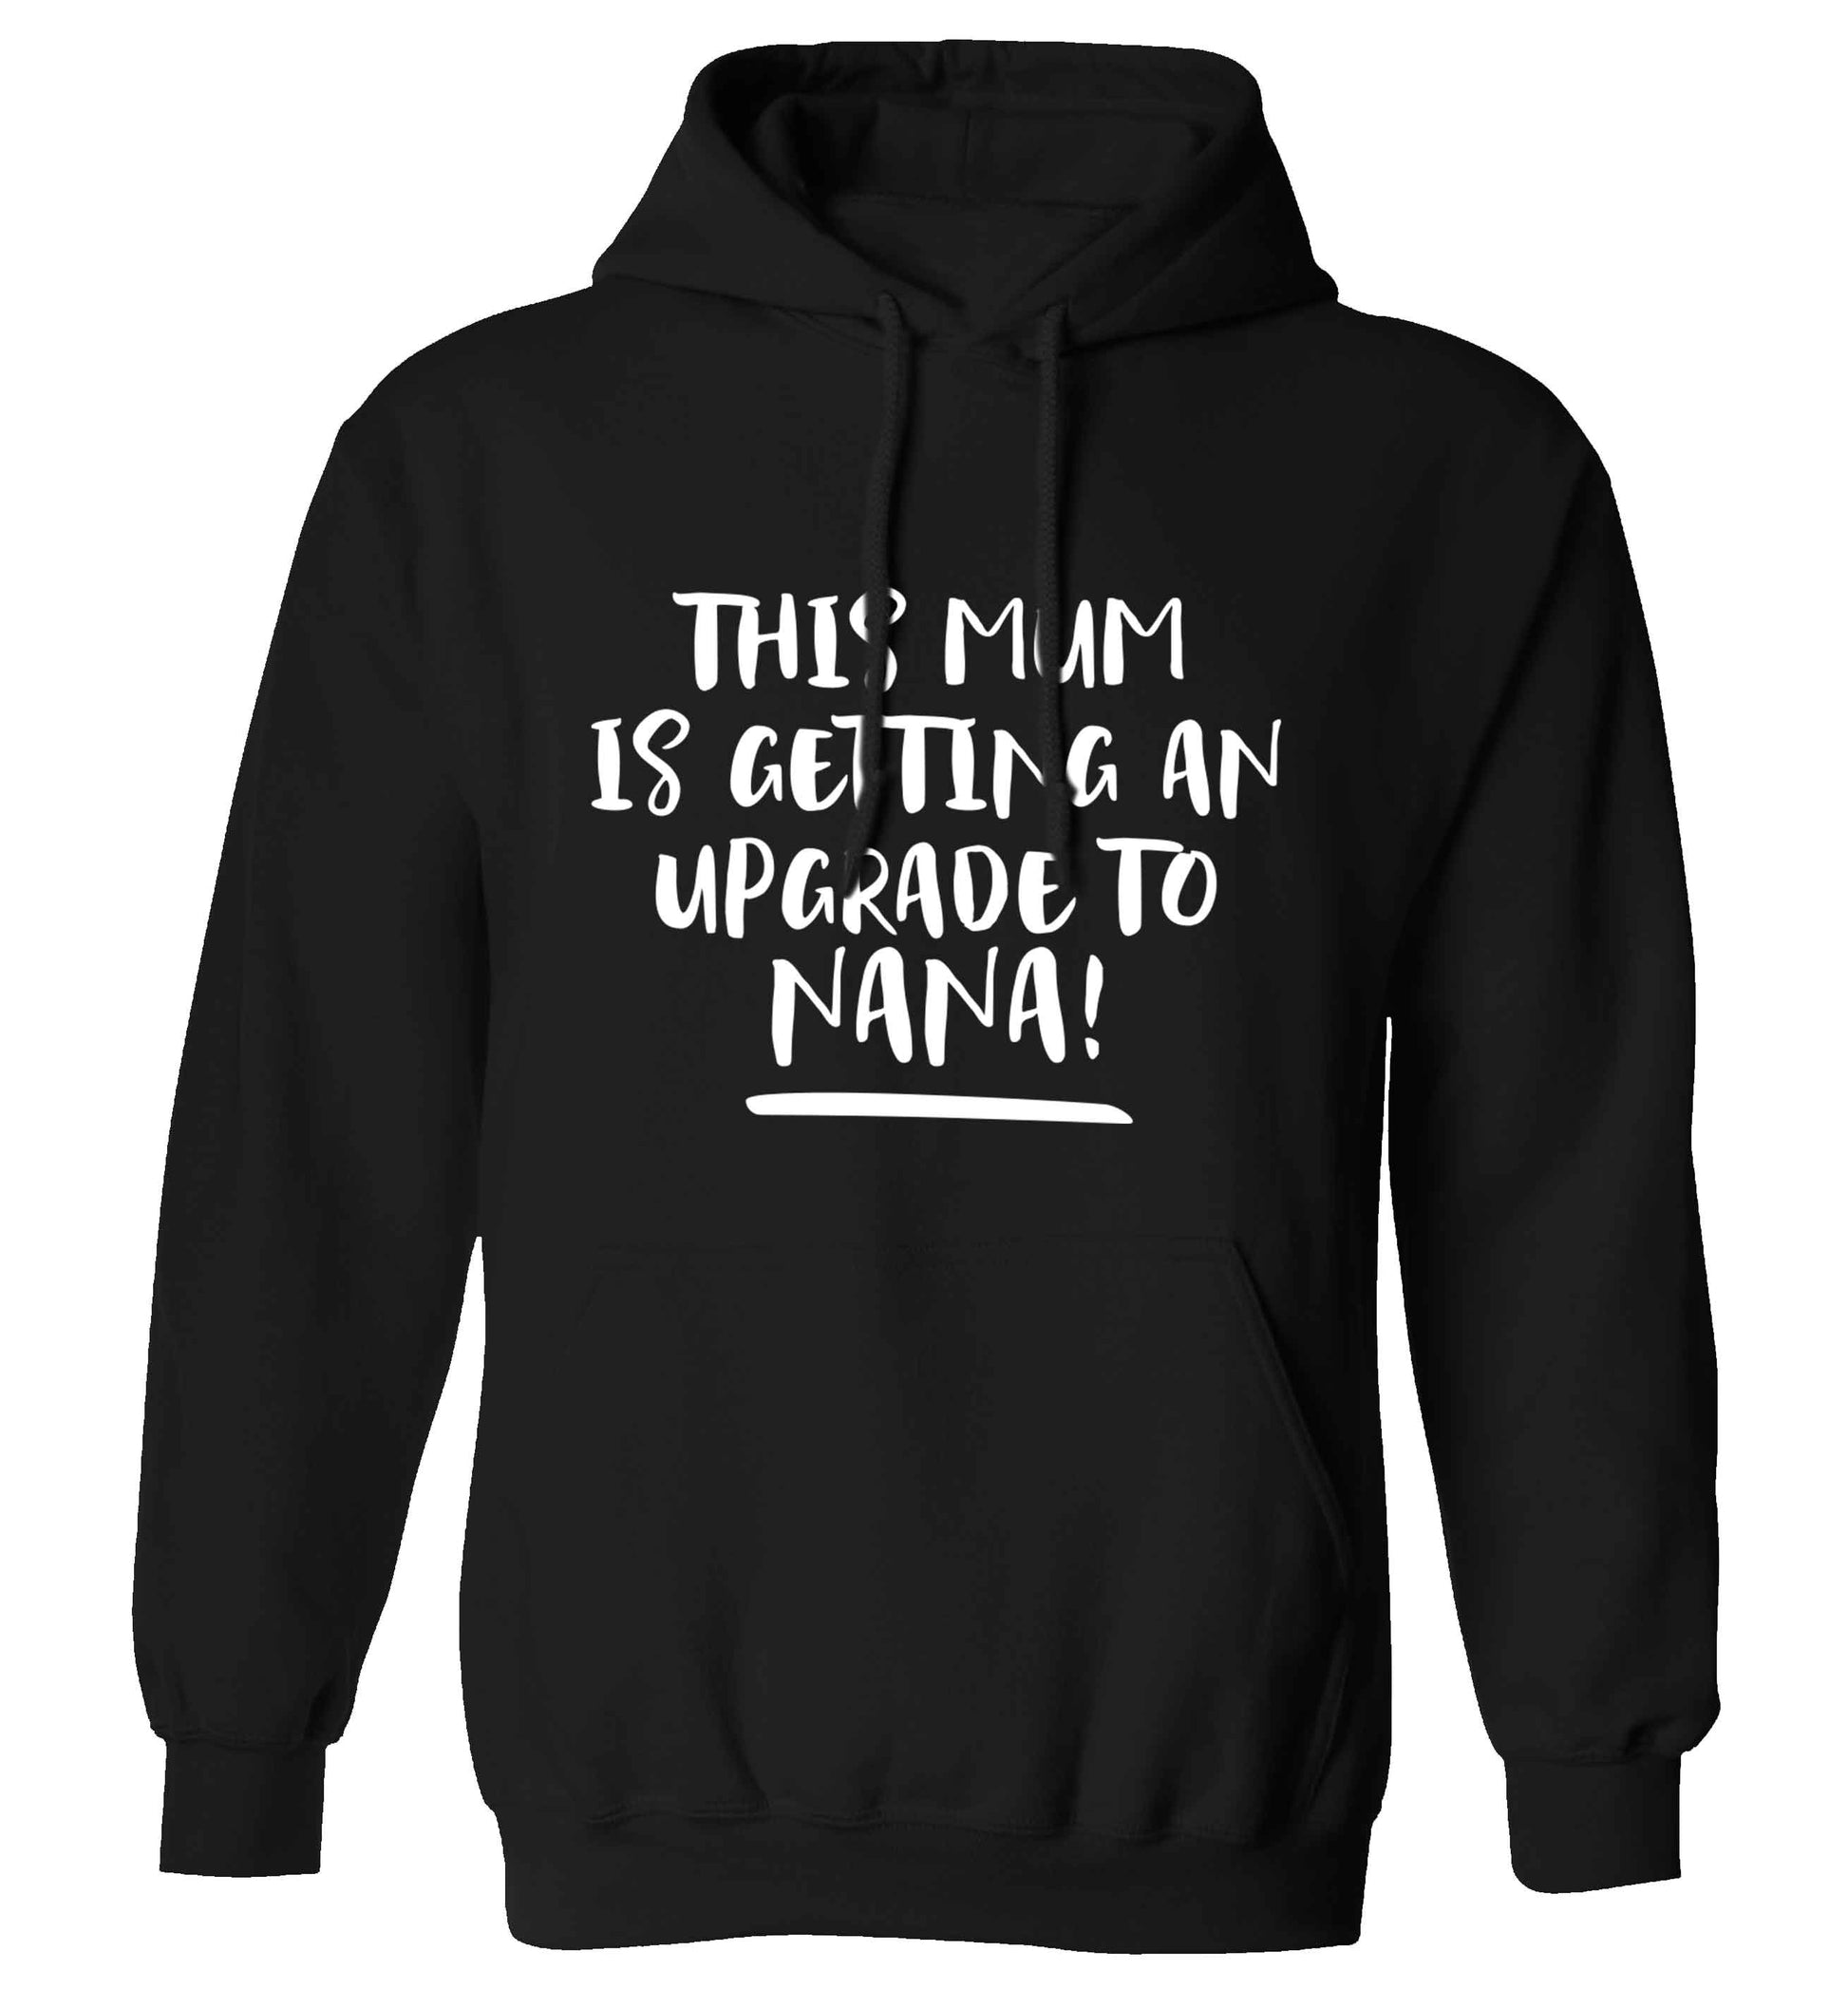 This mum is getting an upgrade to nana! adults unisex black hoodie 2XL